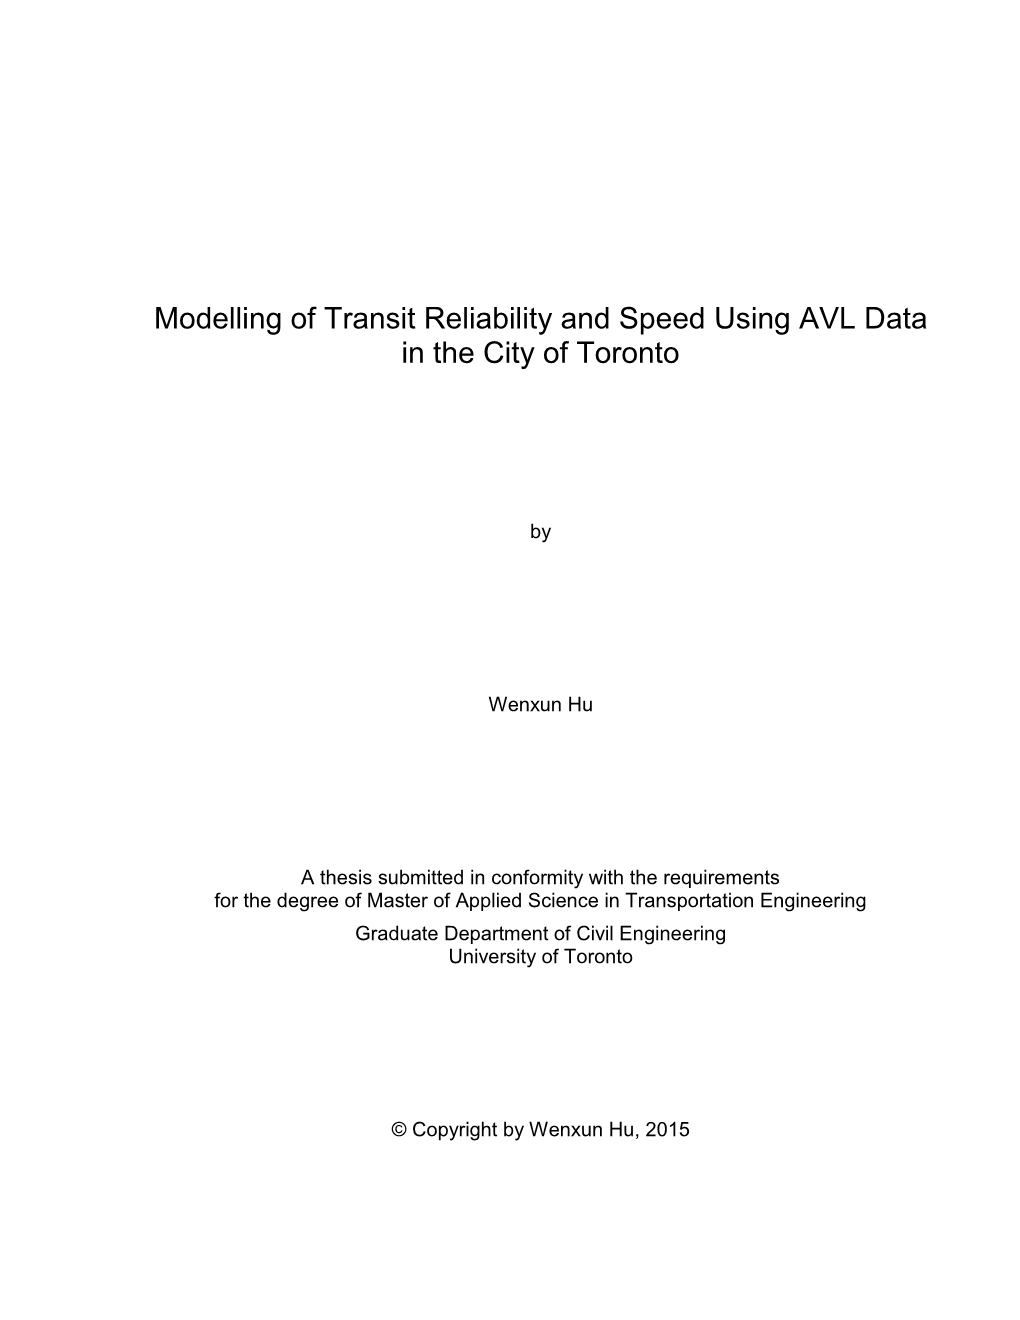 Modelling of Transit Reliability and Speed Using AVL Data in the City of Toronto